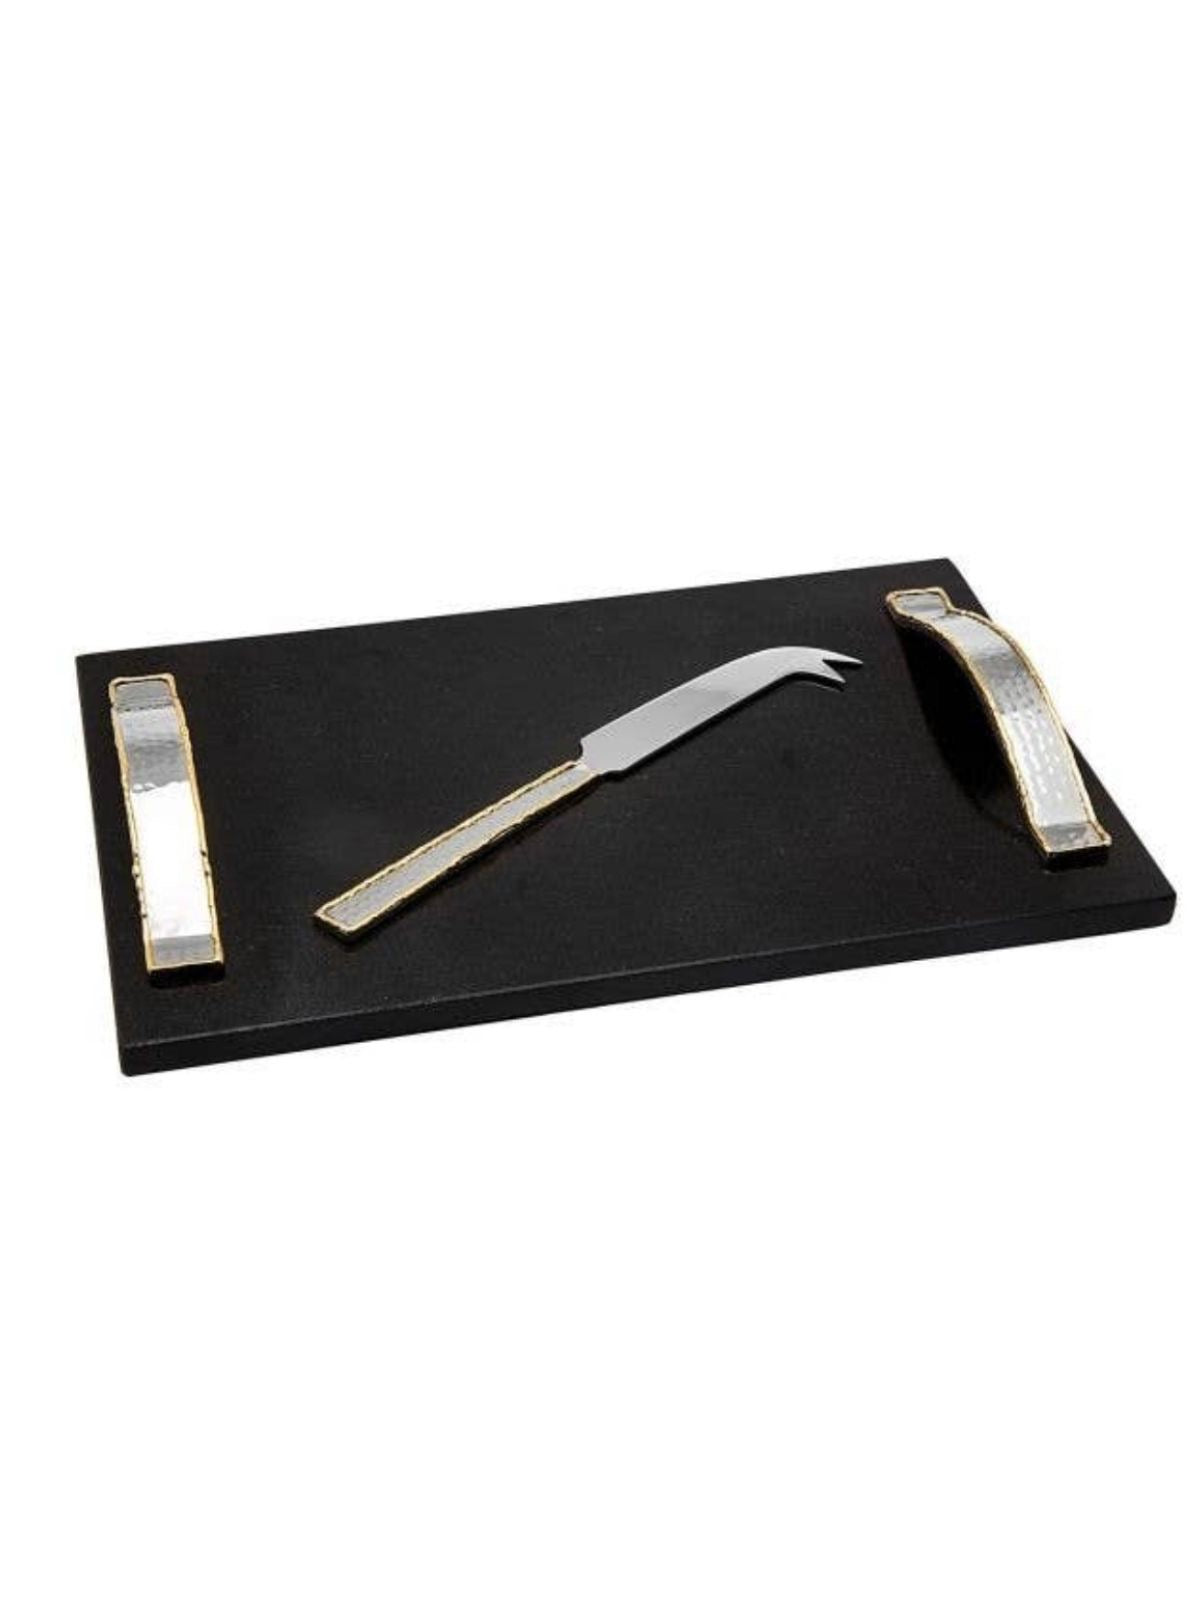 This elegant black marble challah board is as dazzling as it is versatile. Meticulously designed with golden frosted handles and includes a stainless steel knife that will surely impress Available at KYA Home Decor